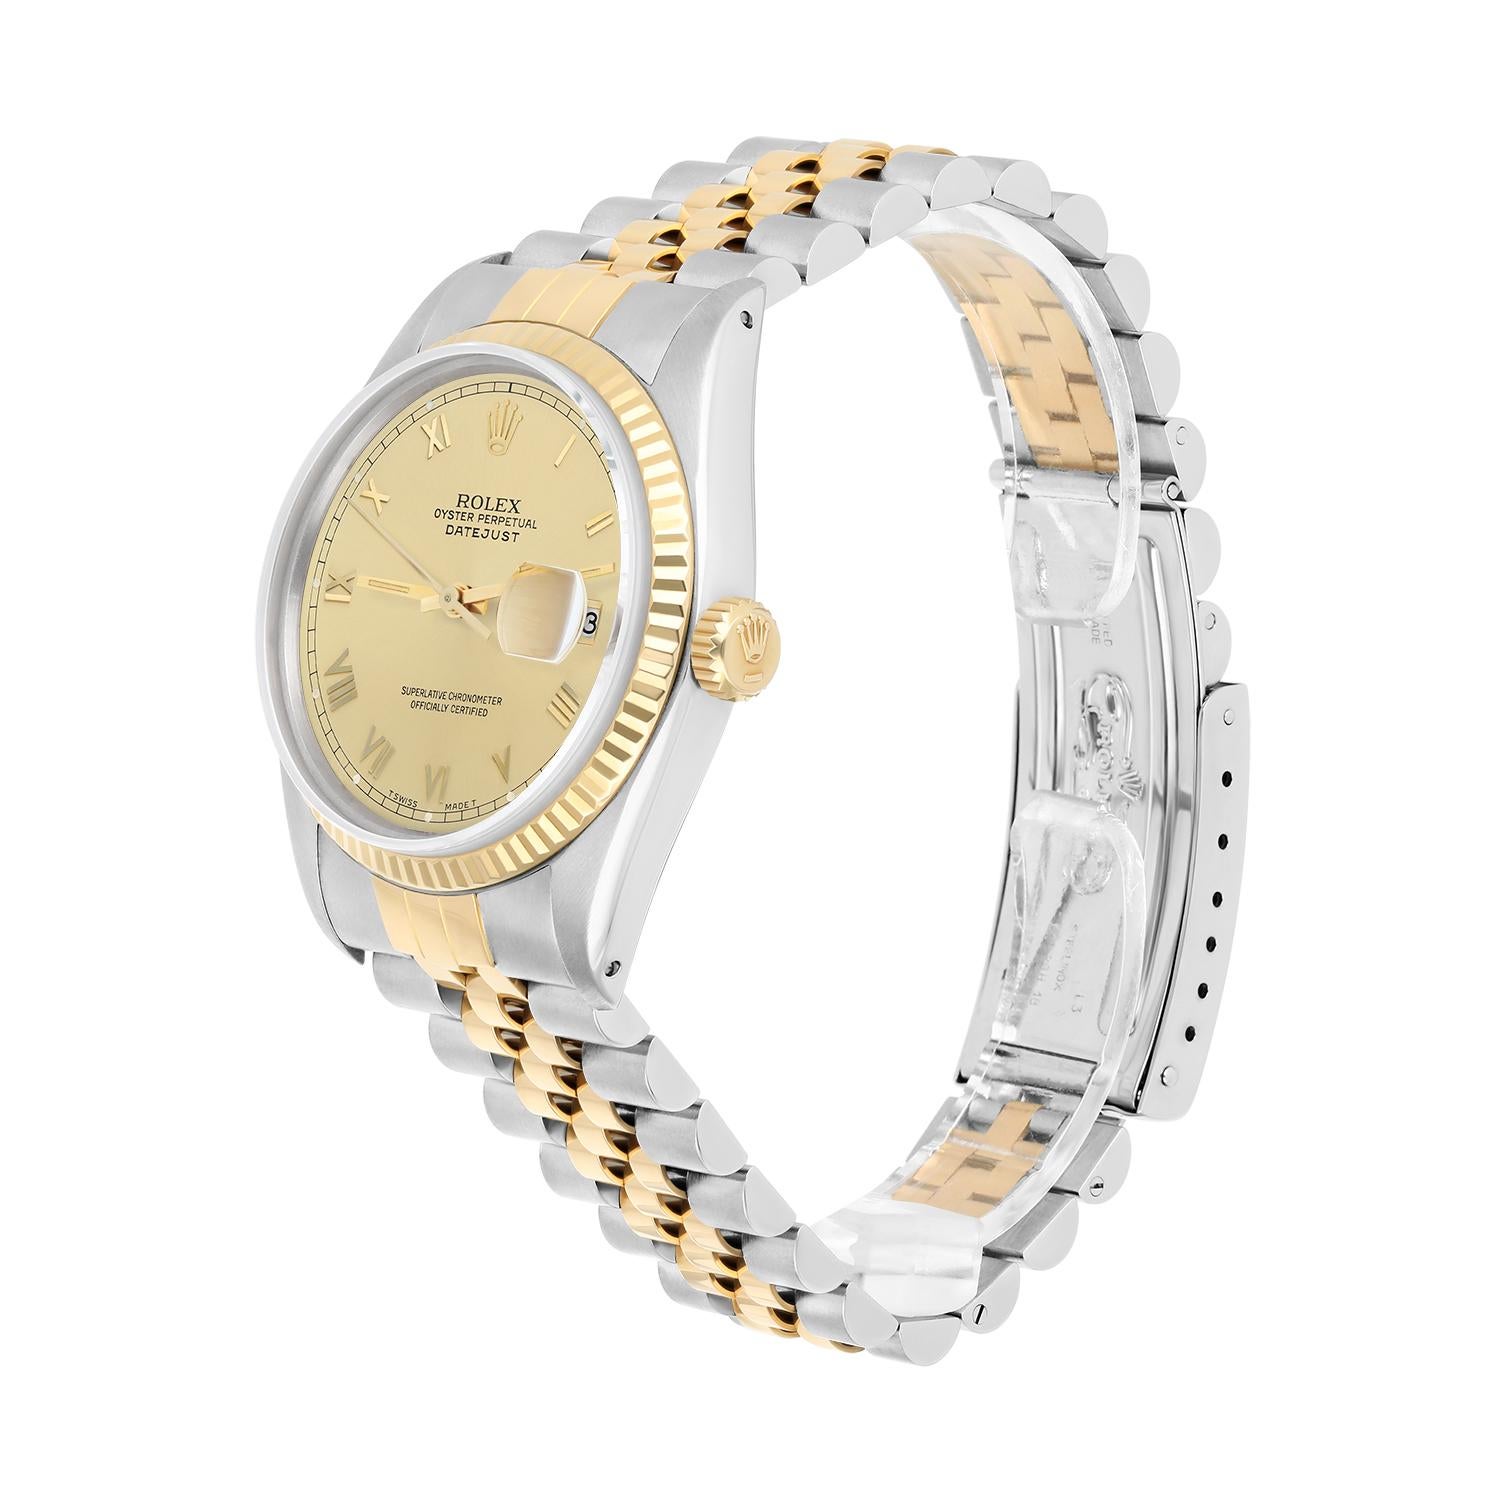 Rolex Datejust 36mm Two Tone Champagne Roman Dial Jubilee 16233 Circa 1991 For Sale 1